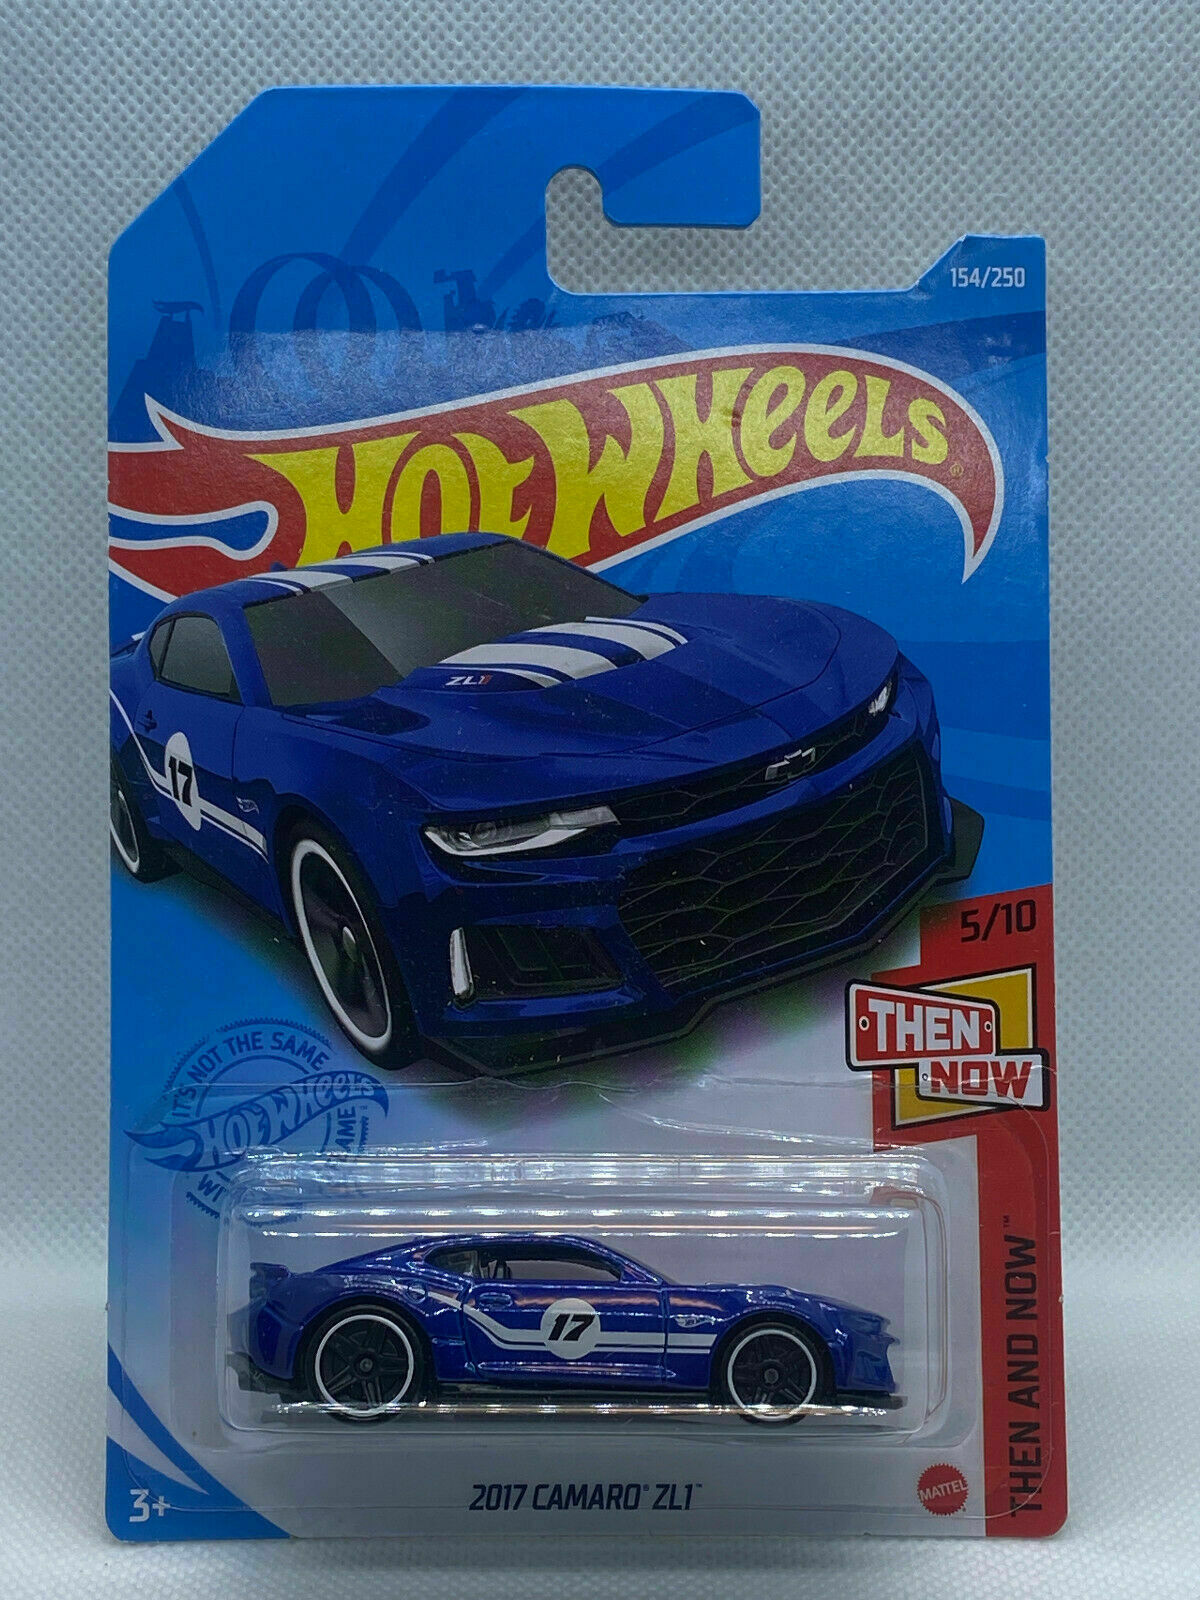 2021 Hot Wheels Then and Now #5/10 Chevrolet 2017 Camaro ZL1 #154/250 NIP